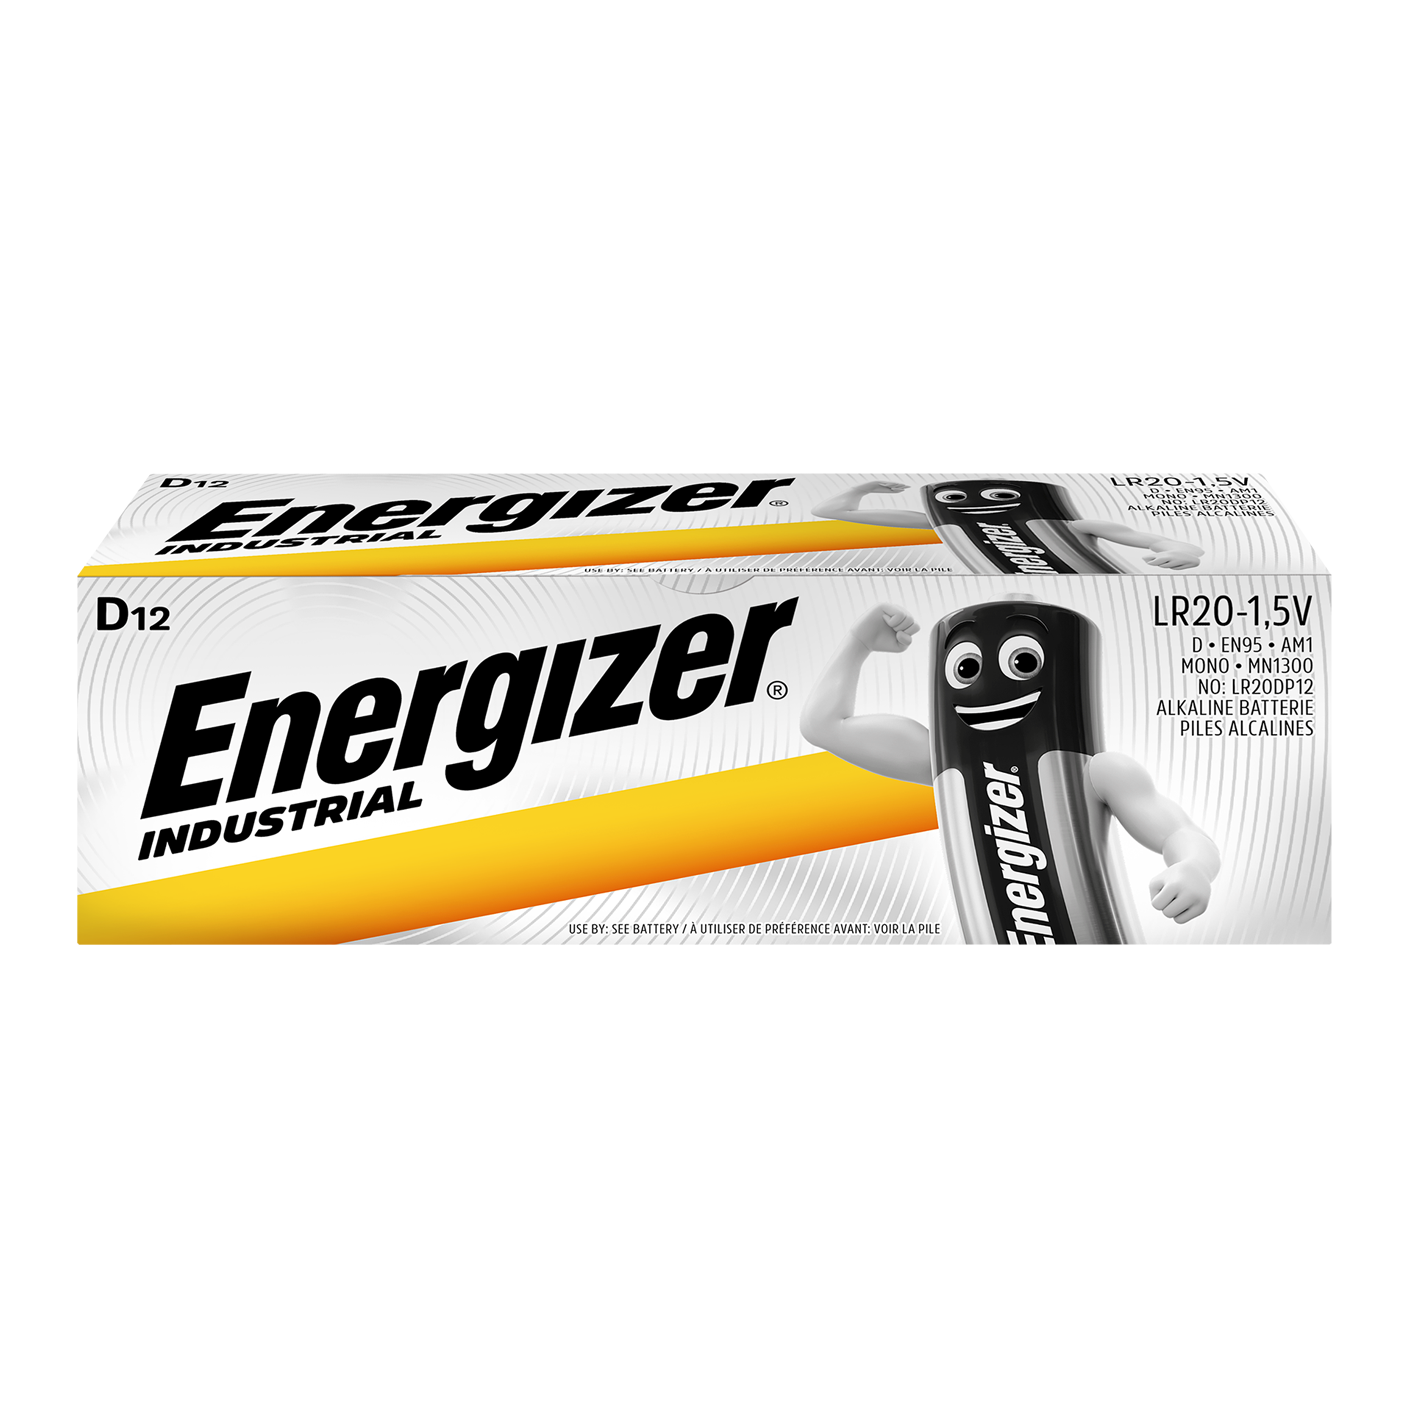 Energizer D Size Industrial, Pack of 12